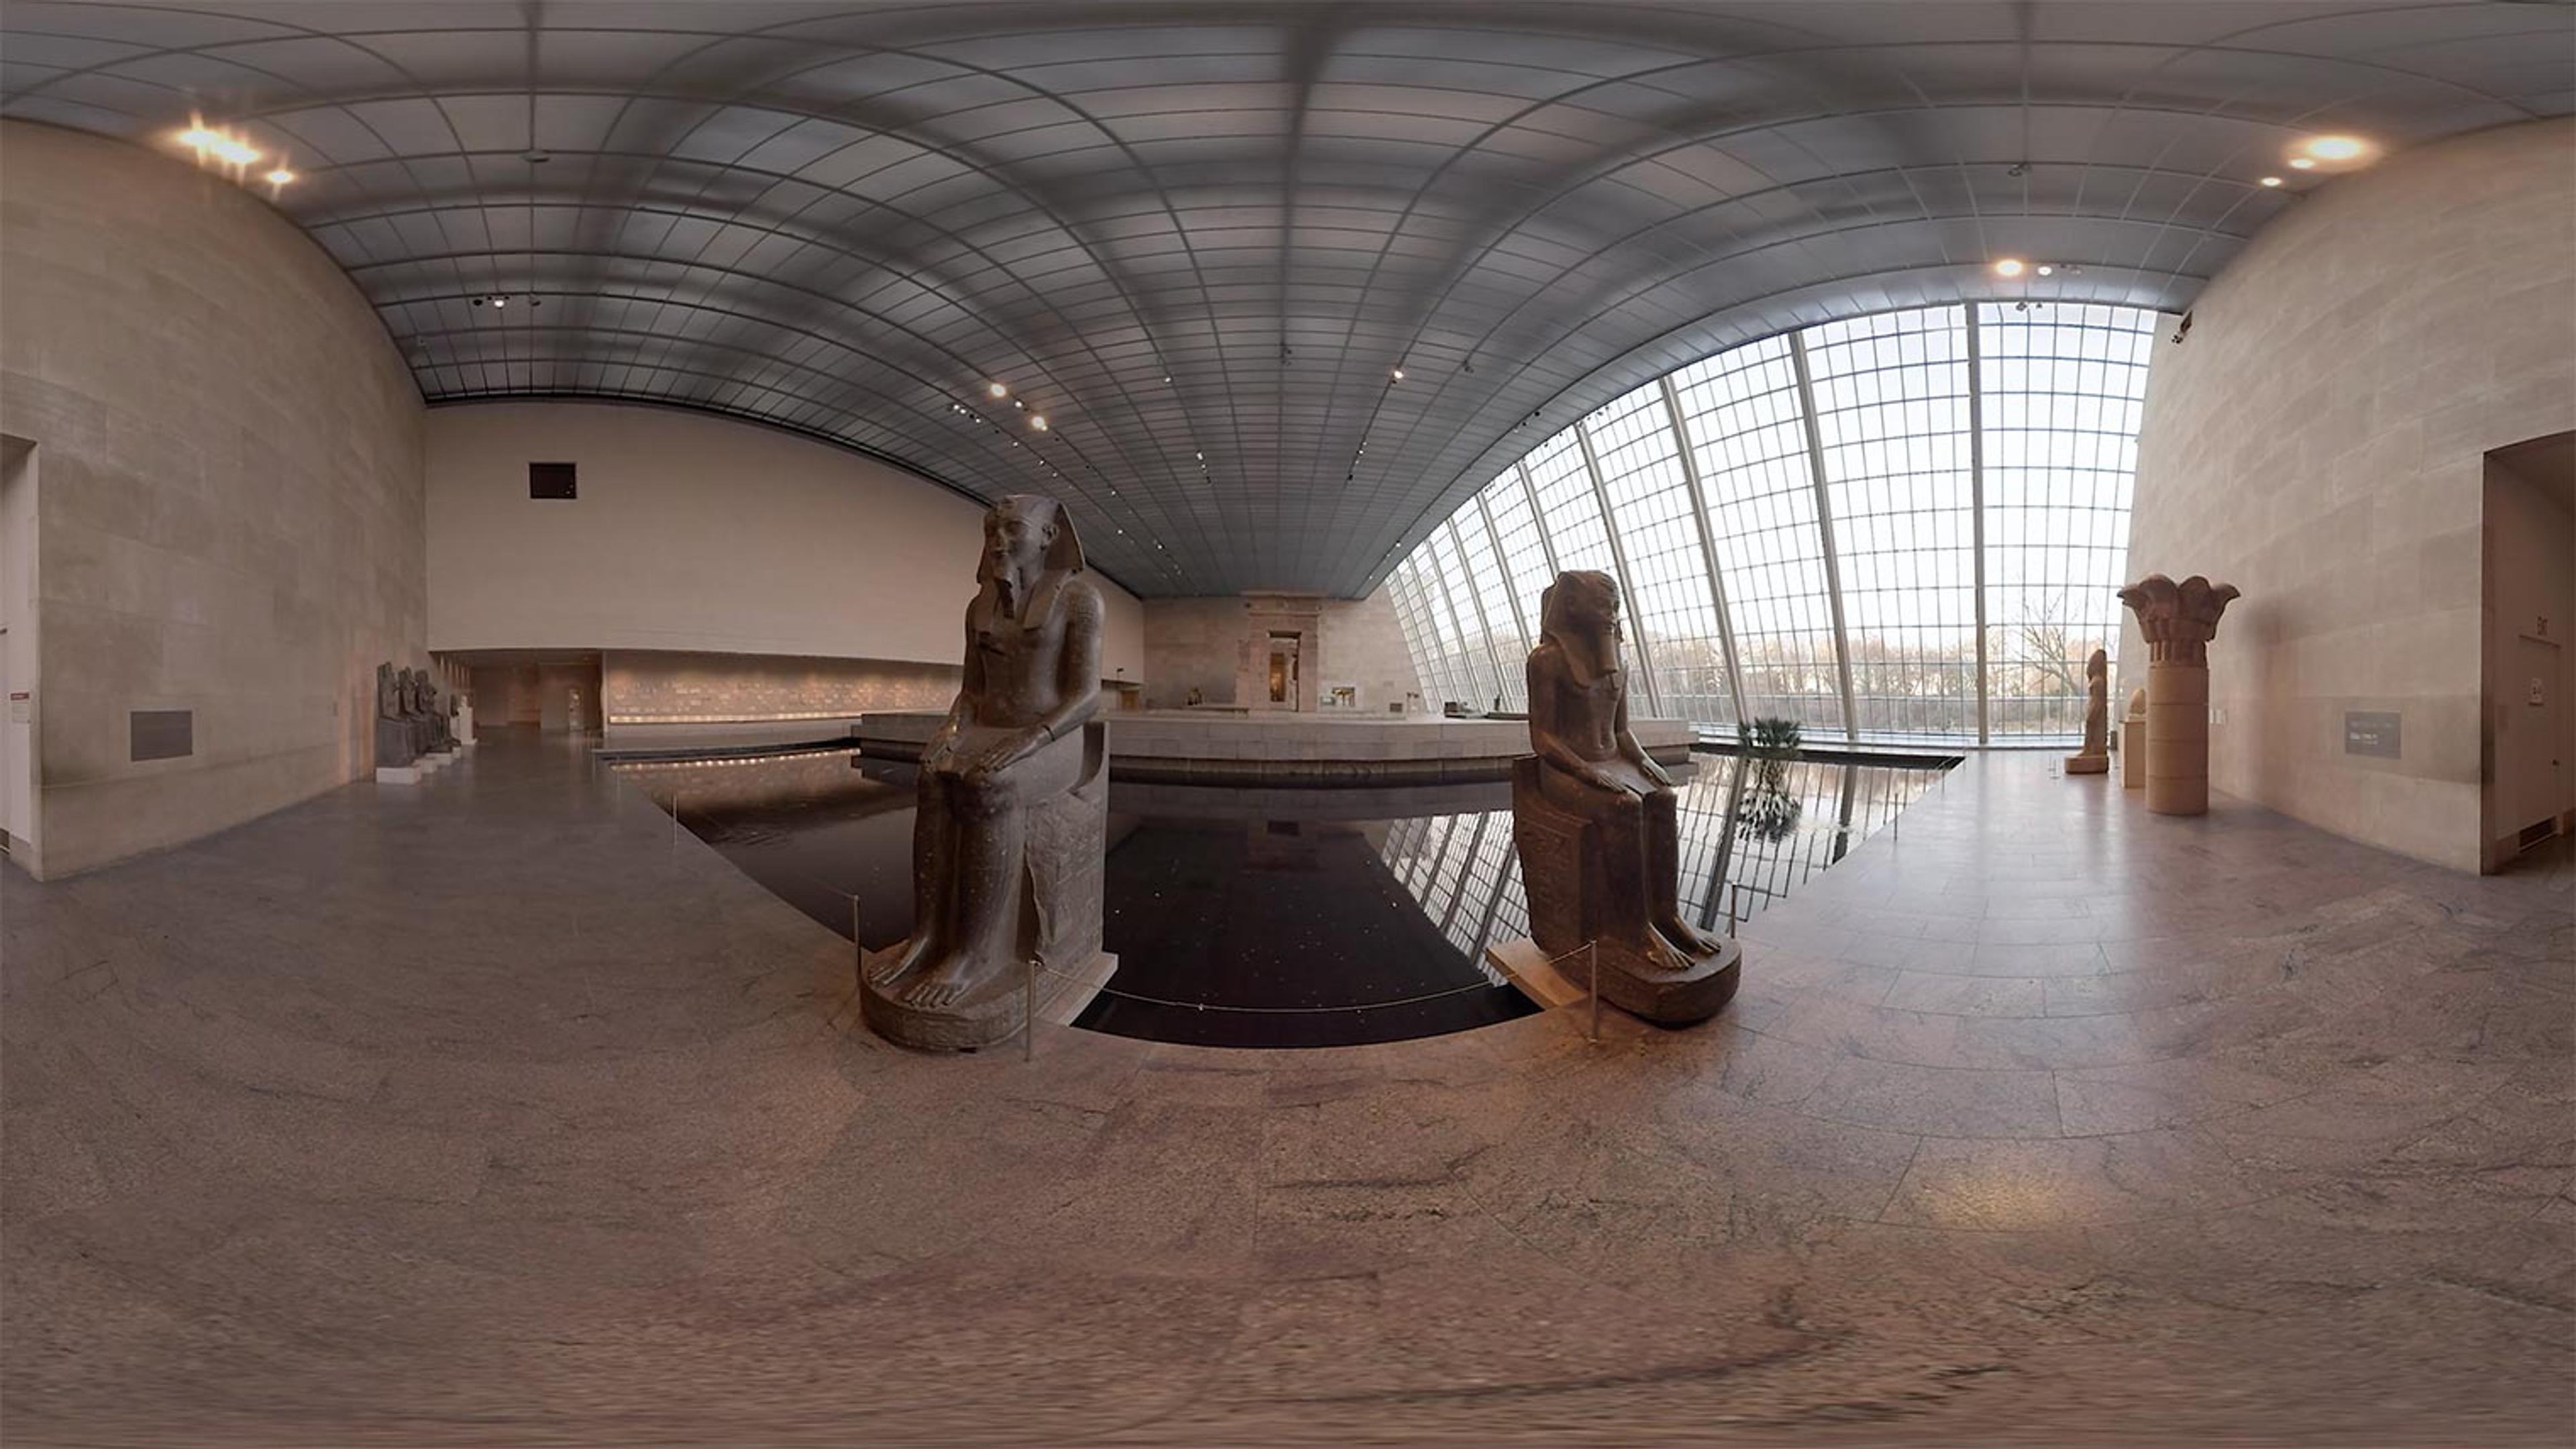 A 360-degree photo of the Temple of Dendur